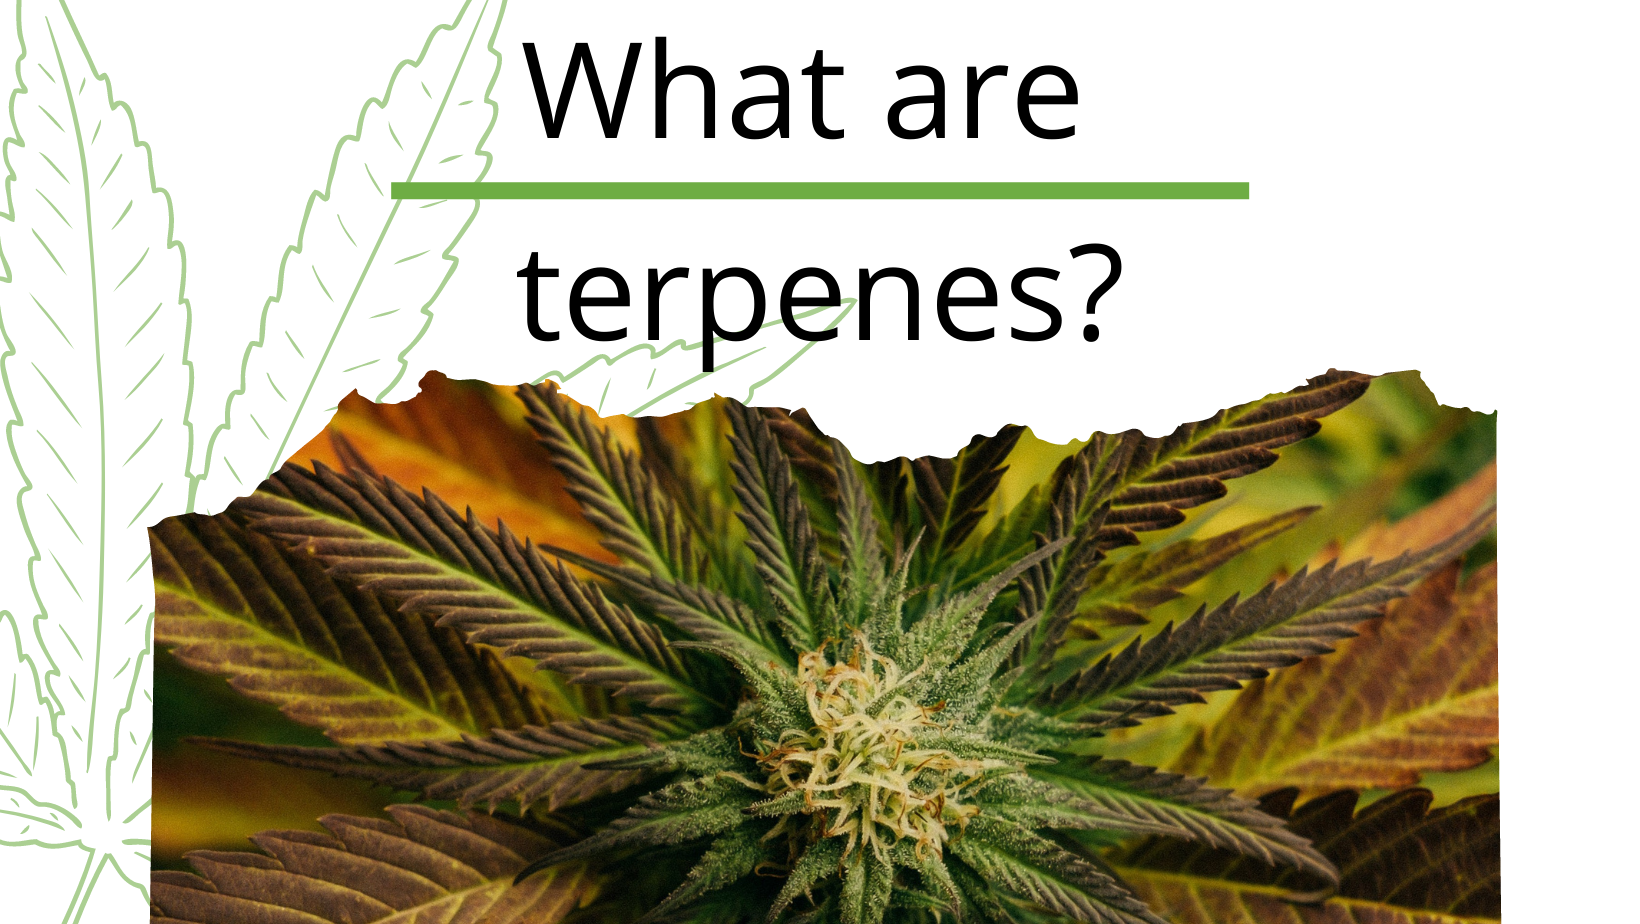 decorative image to promote our blog 'What are terpenes?' with a close up of a marijuana bud